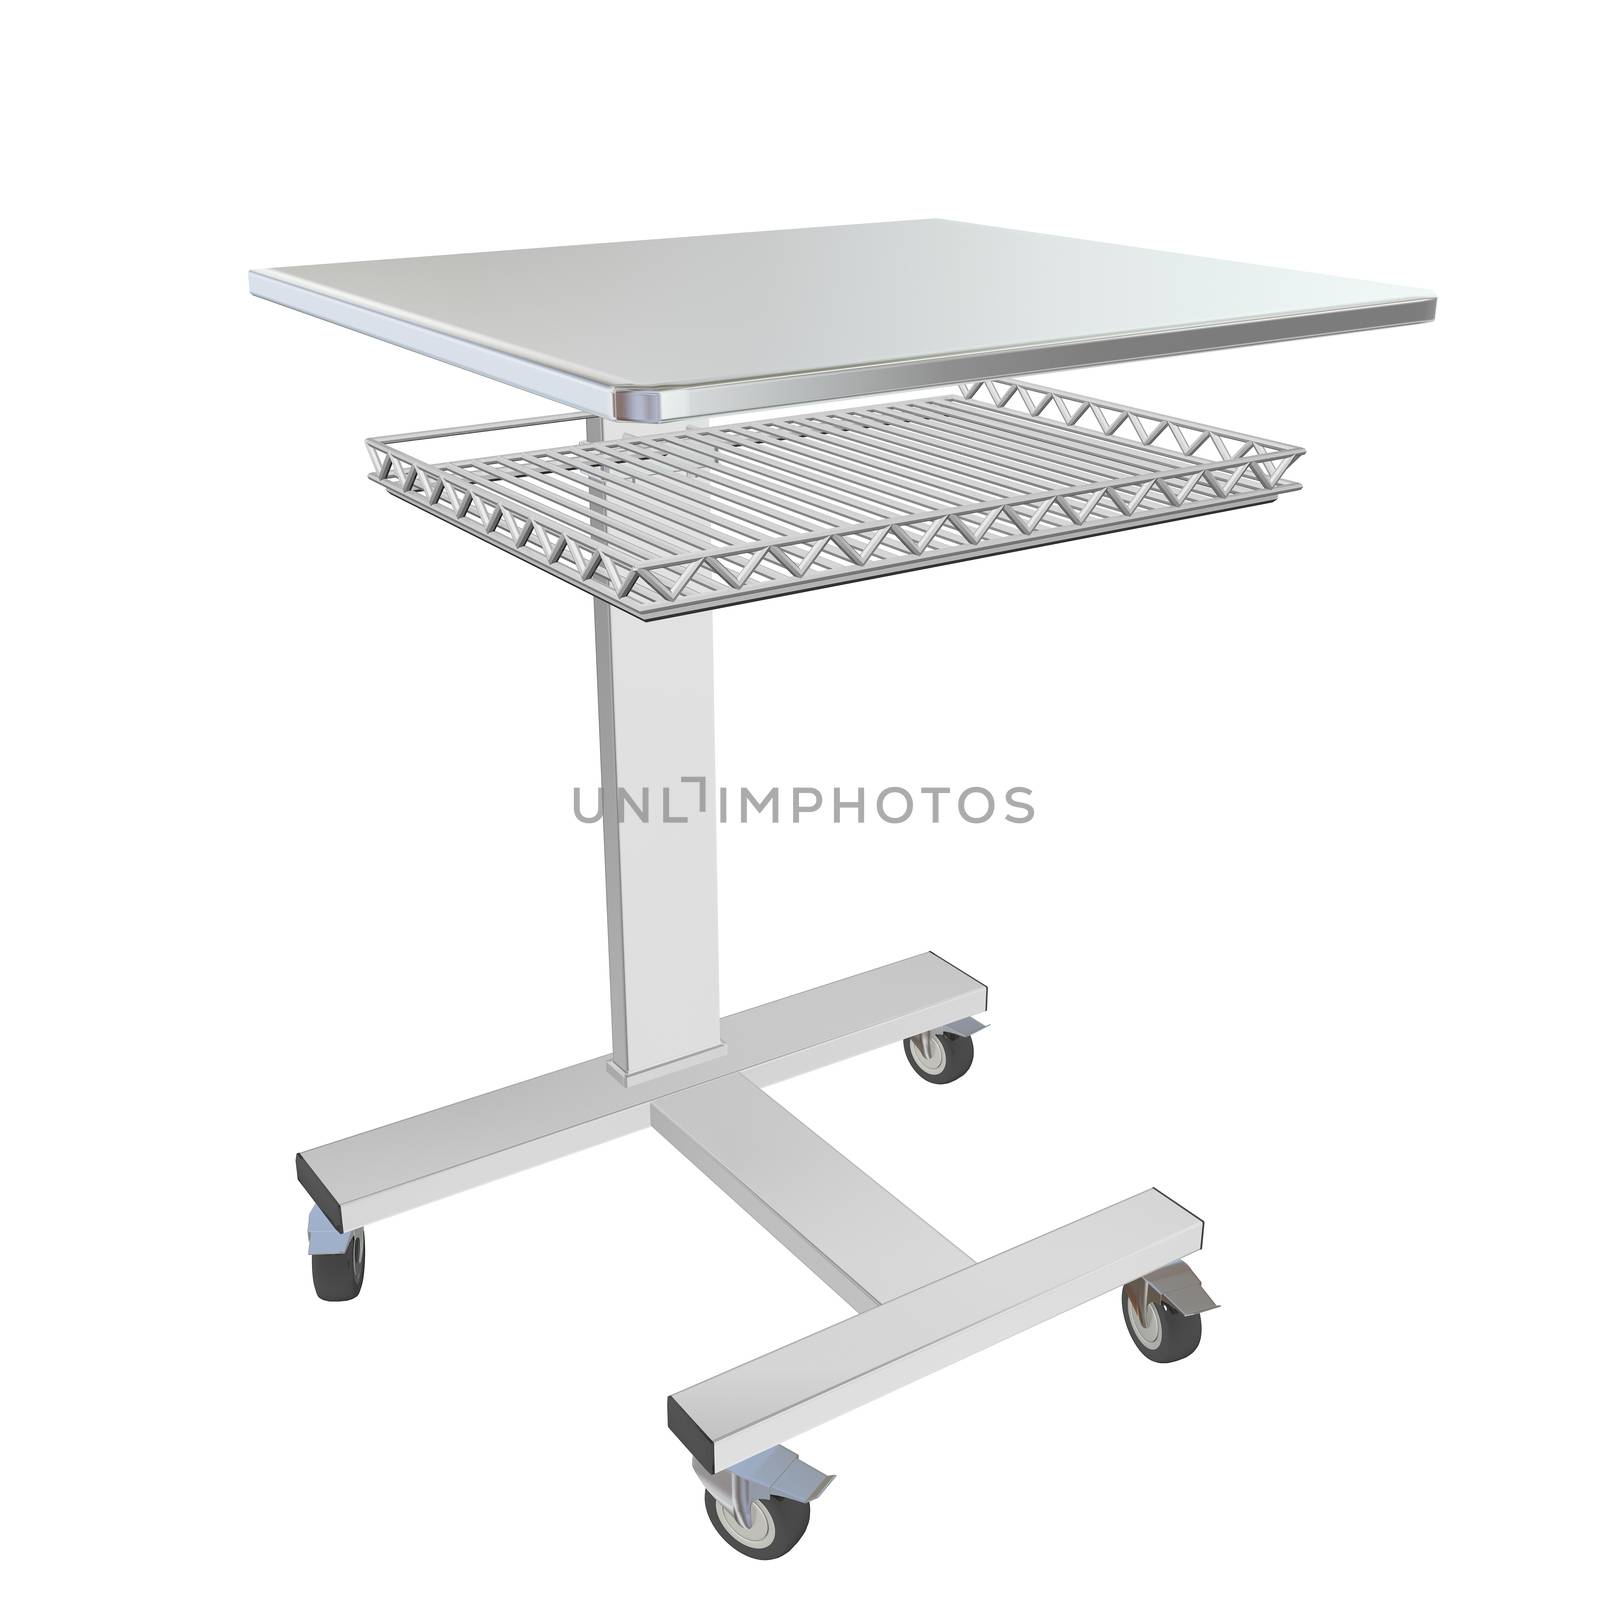 Mobile metal medical over bed table with wire mesh tray, 3d illustration, isolated against a white background